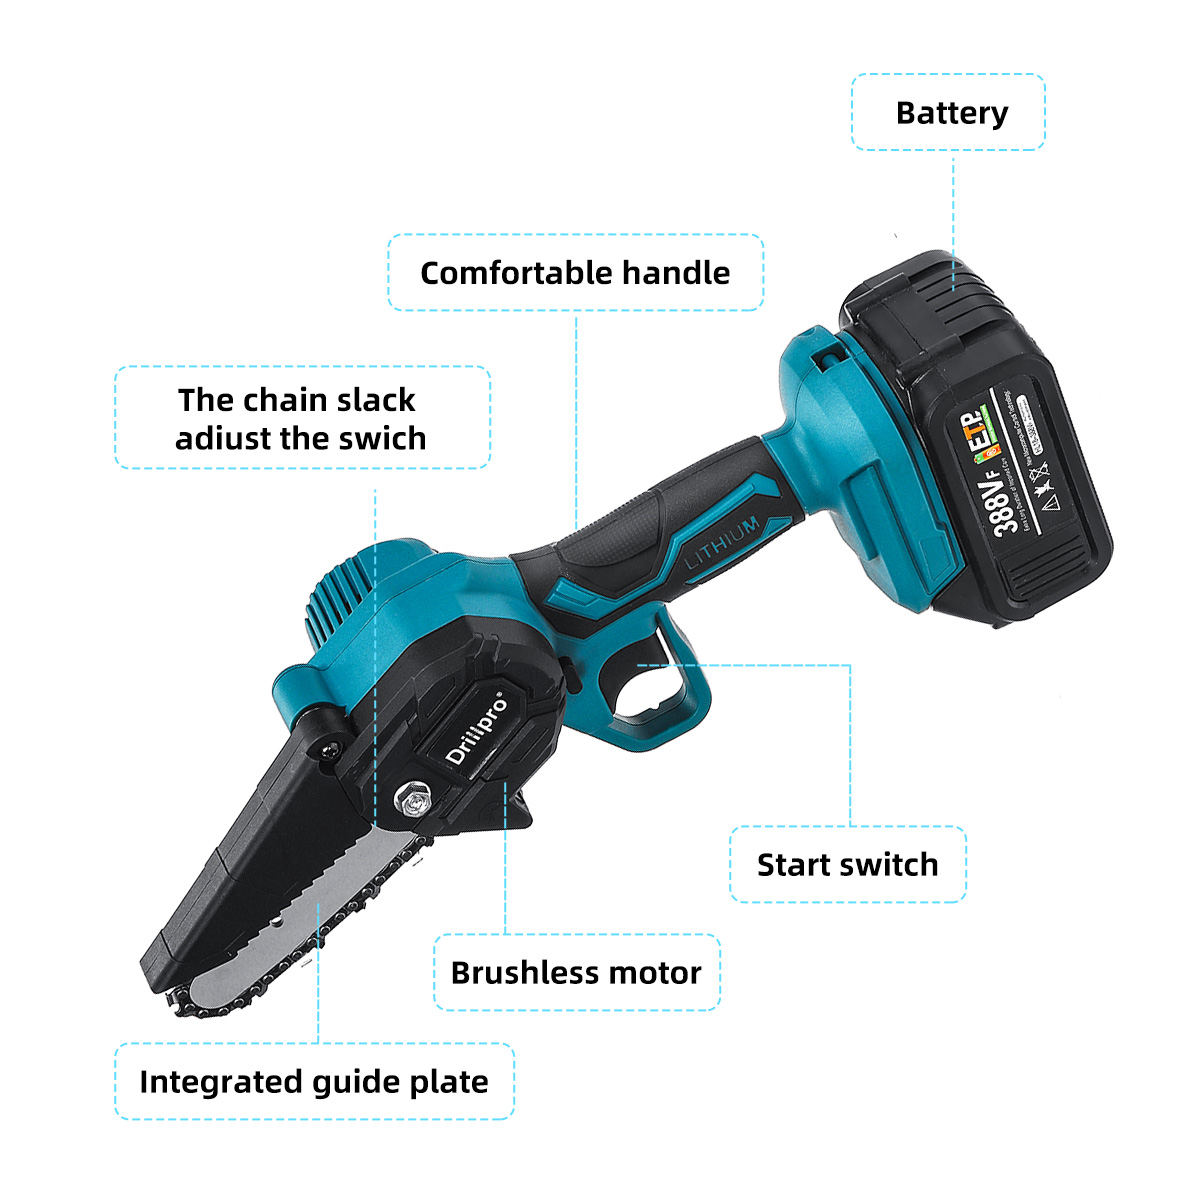 Drillpro-4-Inch-Electric-Chain-Saw-Mini-Cordless-550W-One-Hand-Saw-Woodworking-Wood-Cutter-W-1pc-or--1855260-10